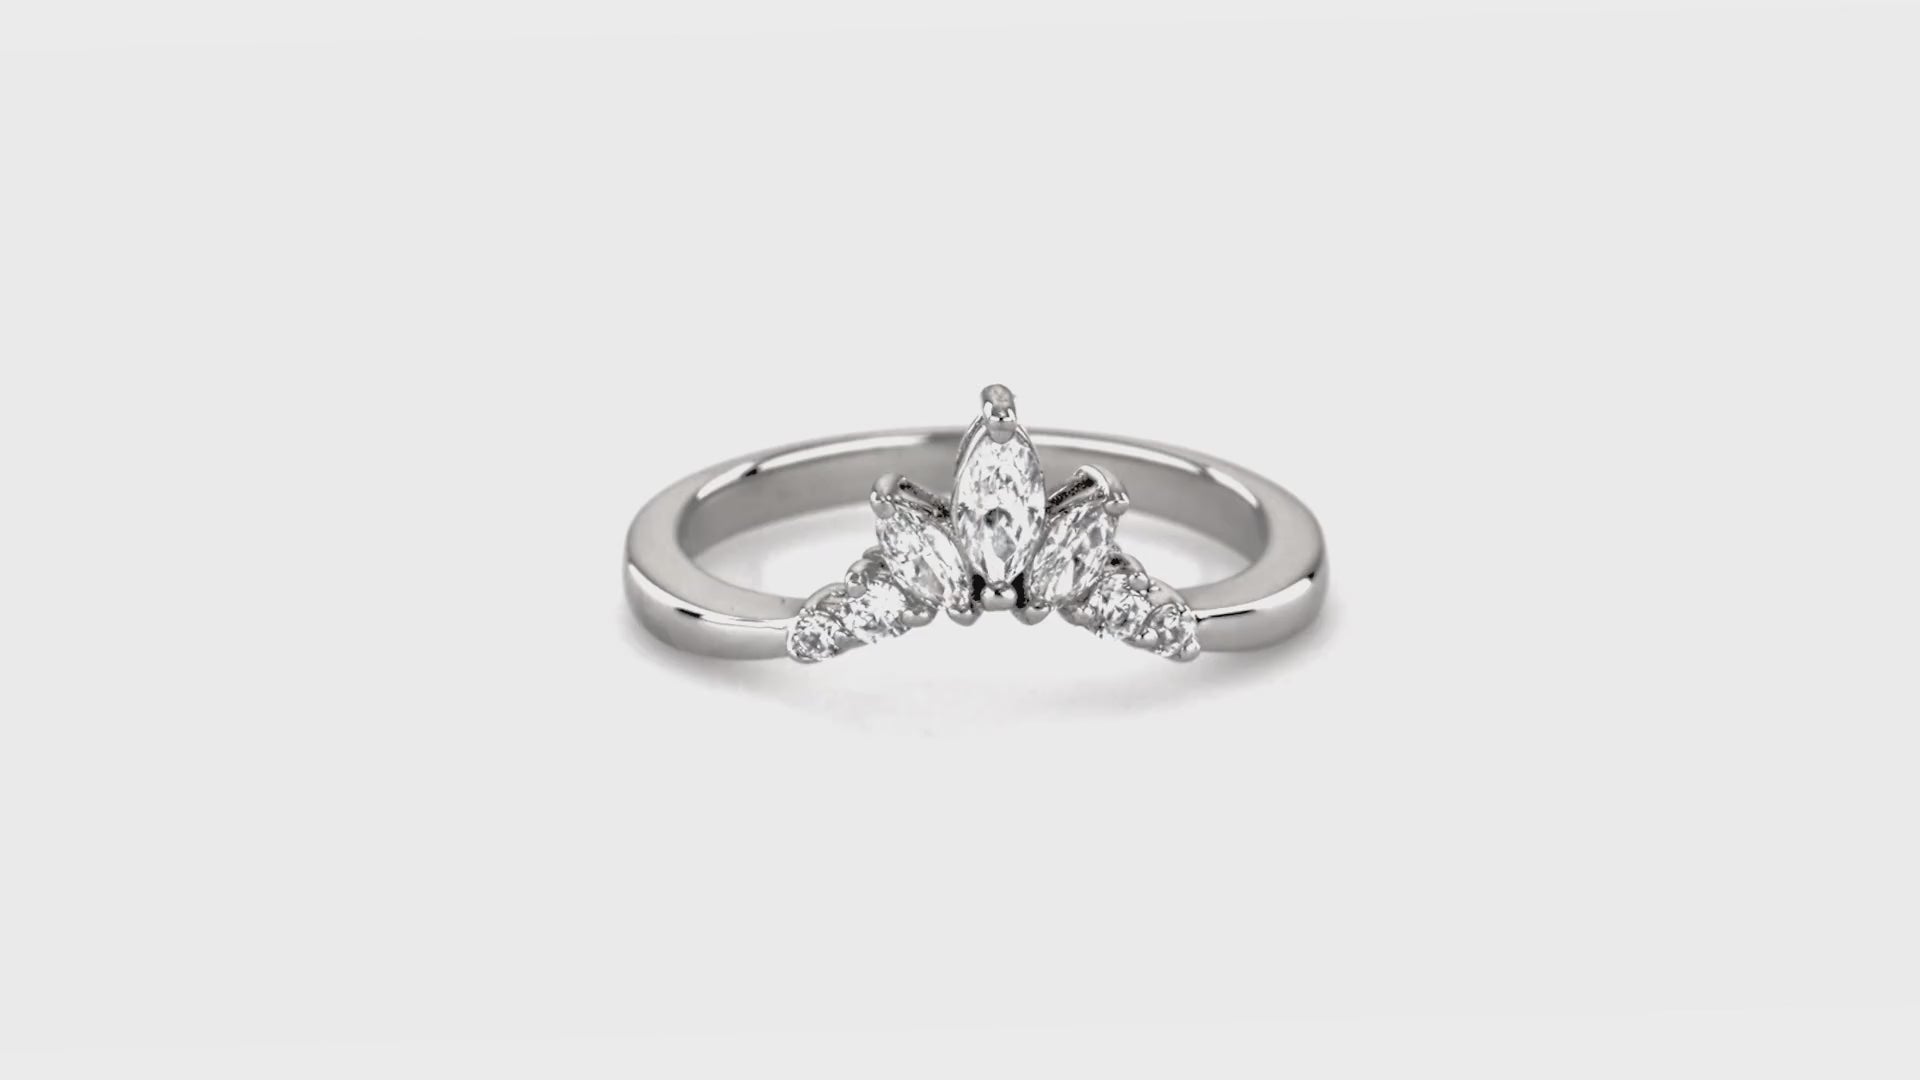 Video Contains 3-Stone 7-Stone Round CZ Ring Set in Sterling Silver. Style Number VR446-01